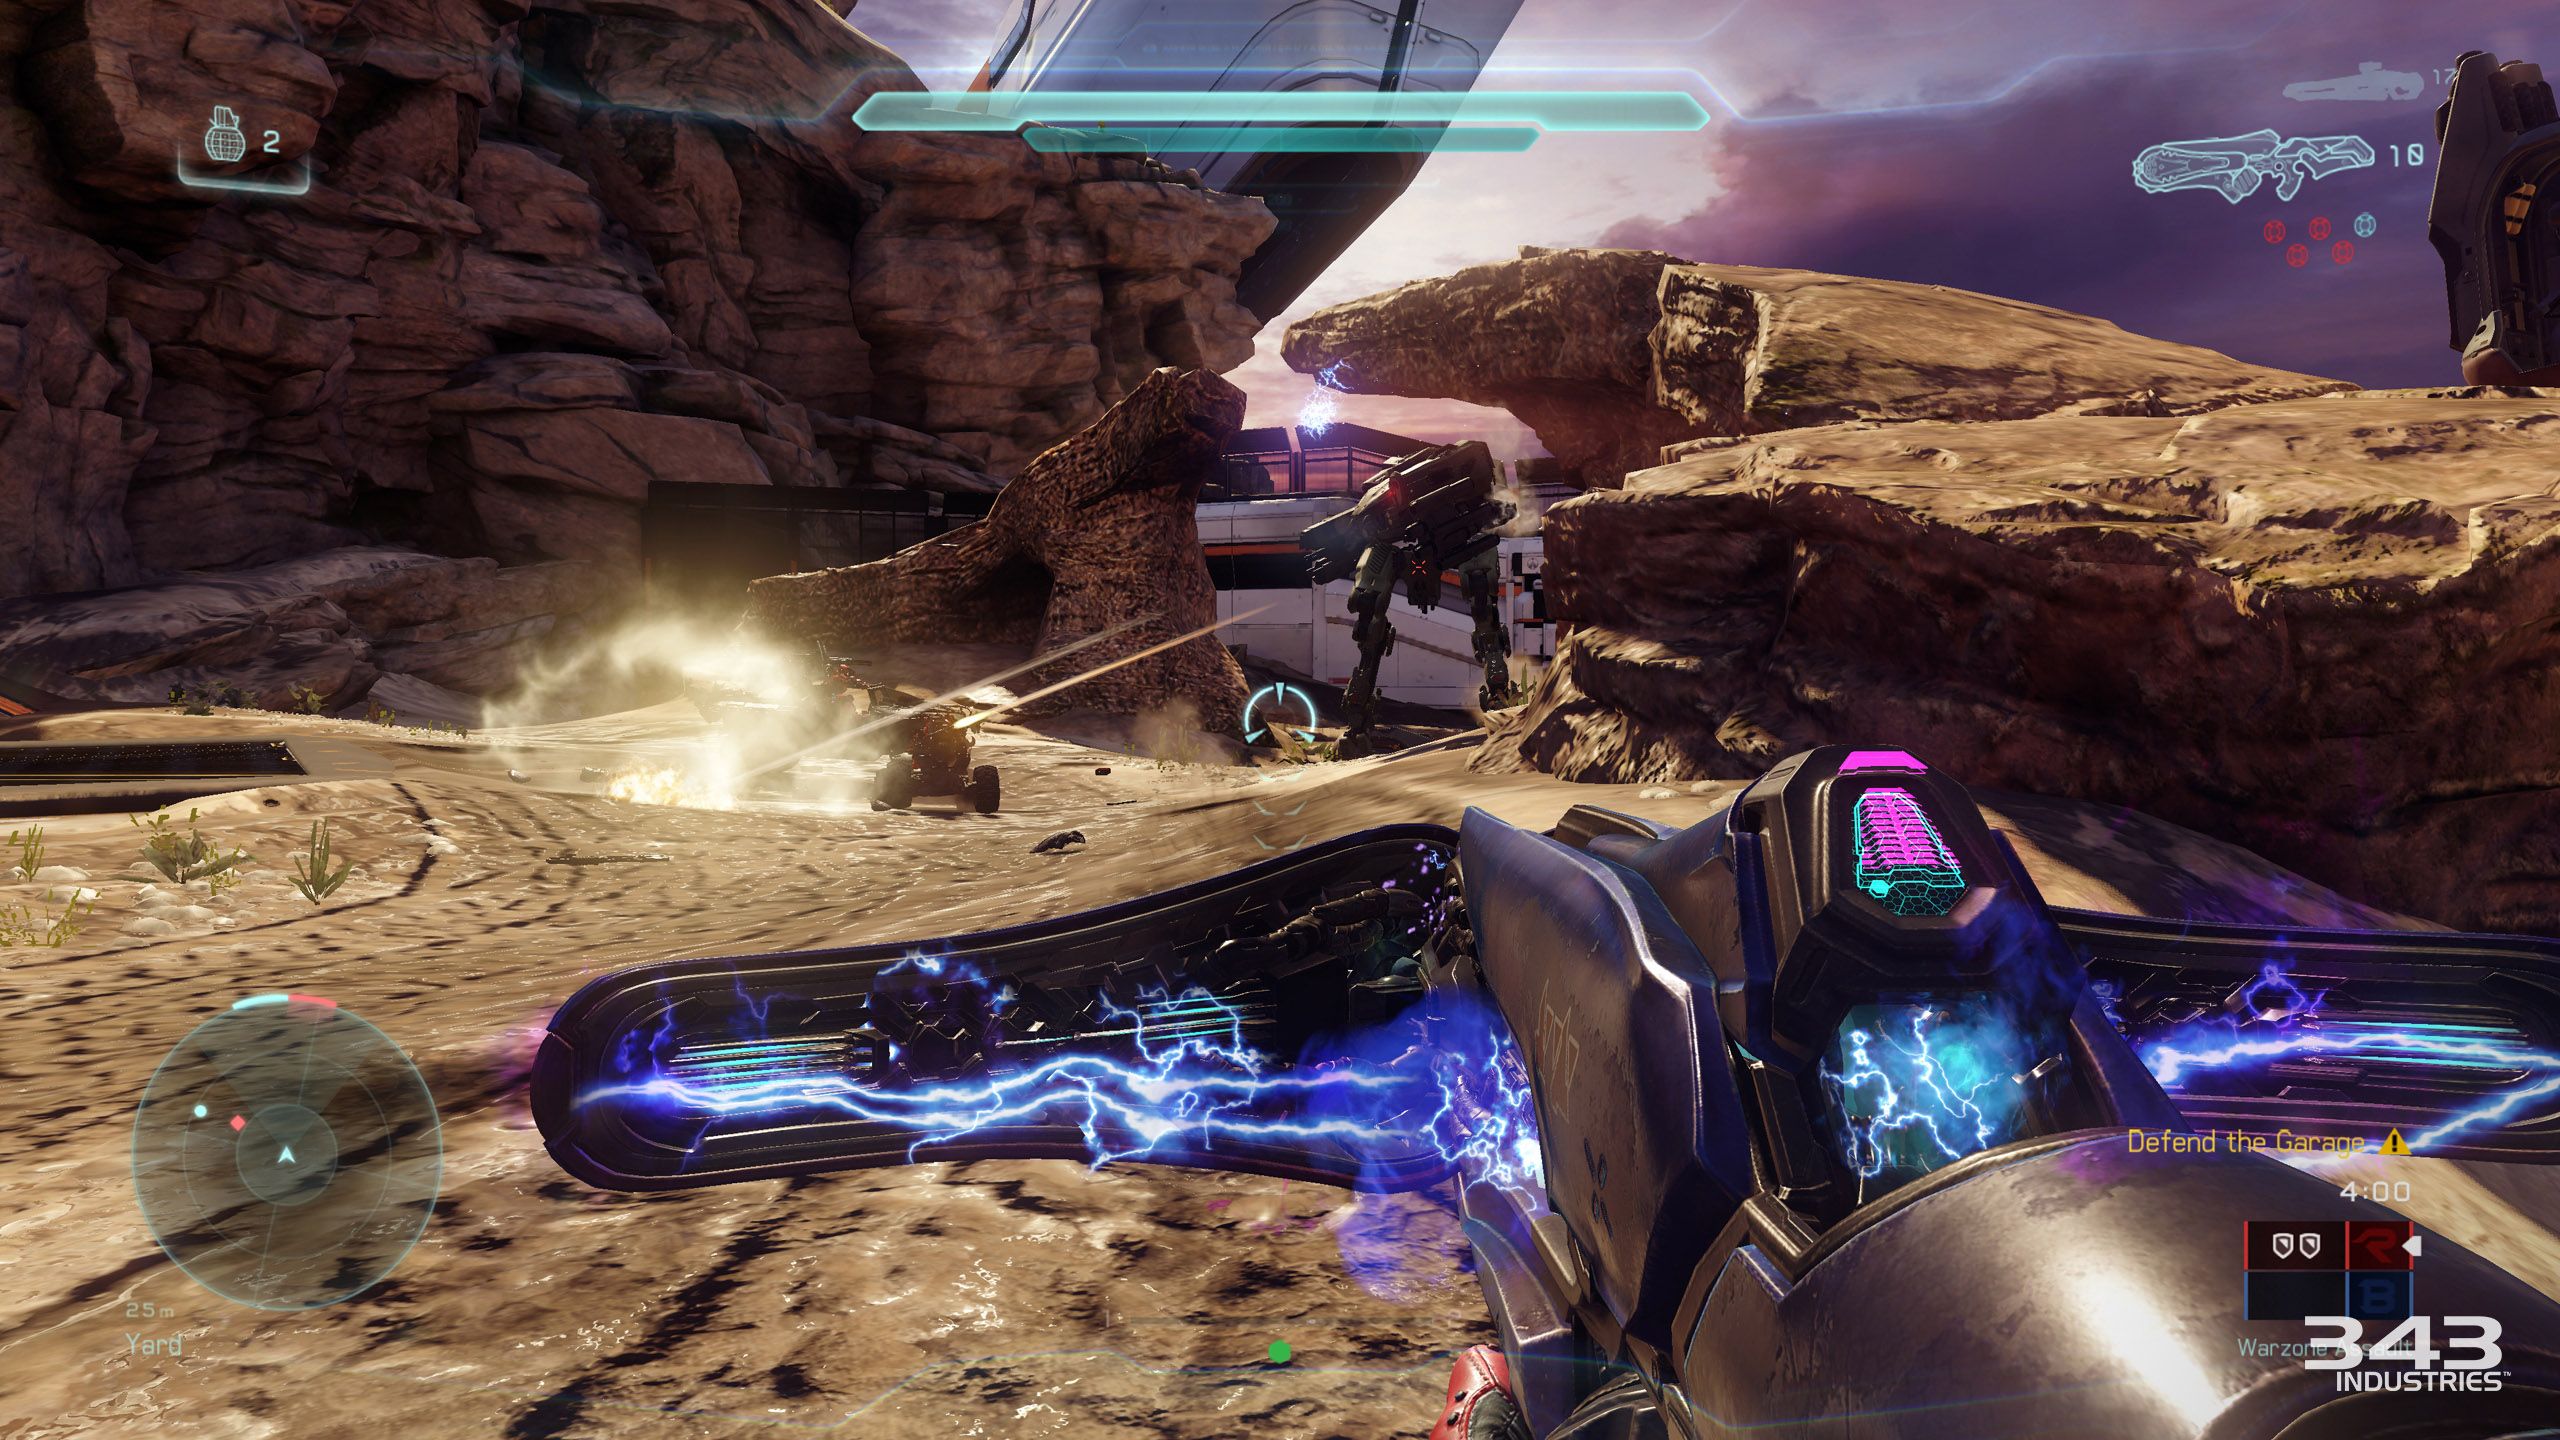 Halo 5 Guardians Delivers The Best Online Multiplayer in the Series